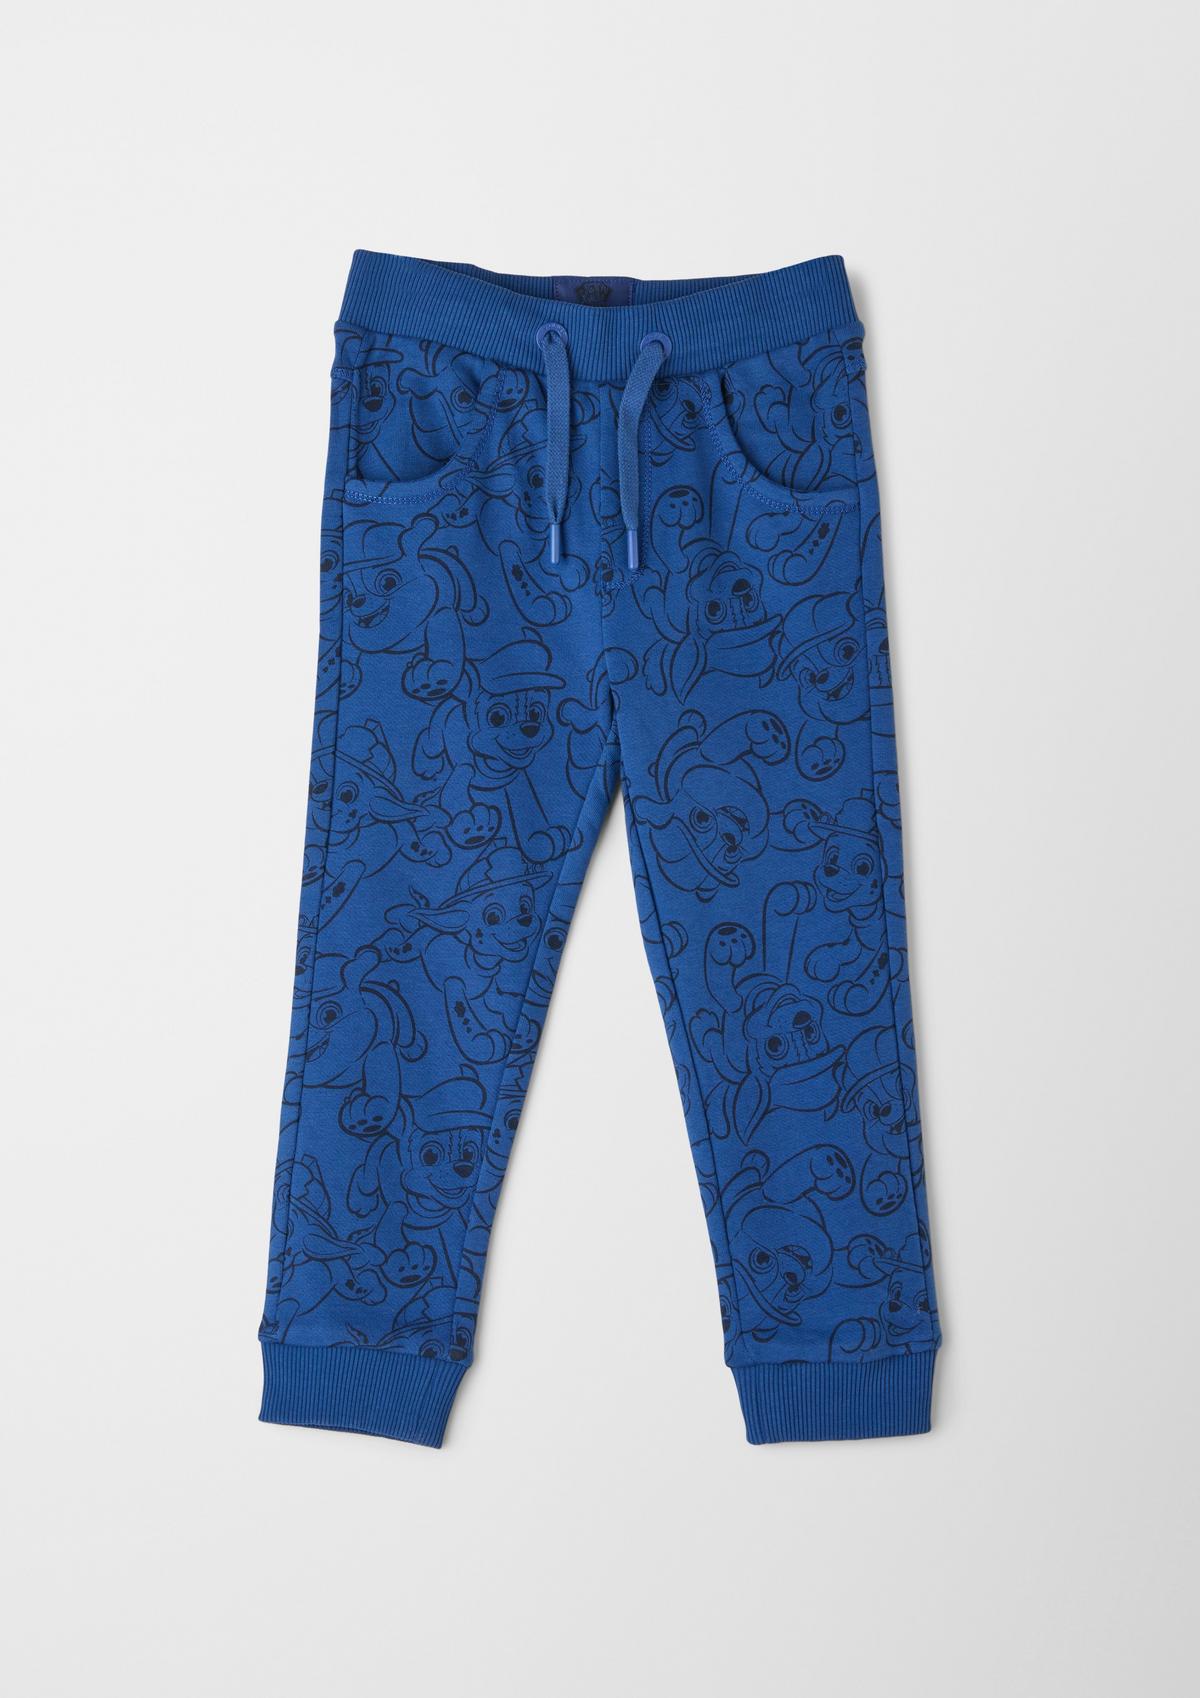 s.Oliver Leggings with a Paw Patrol motif